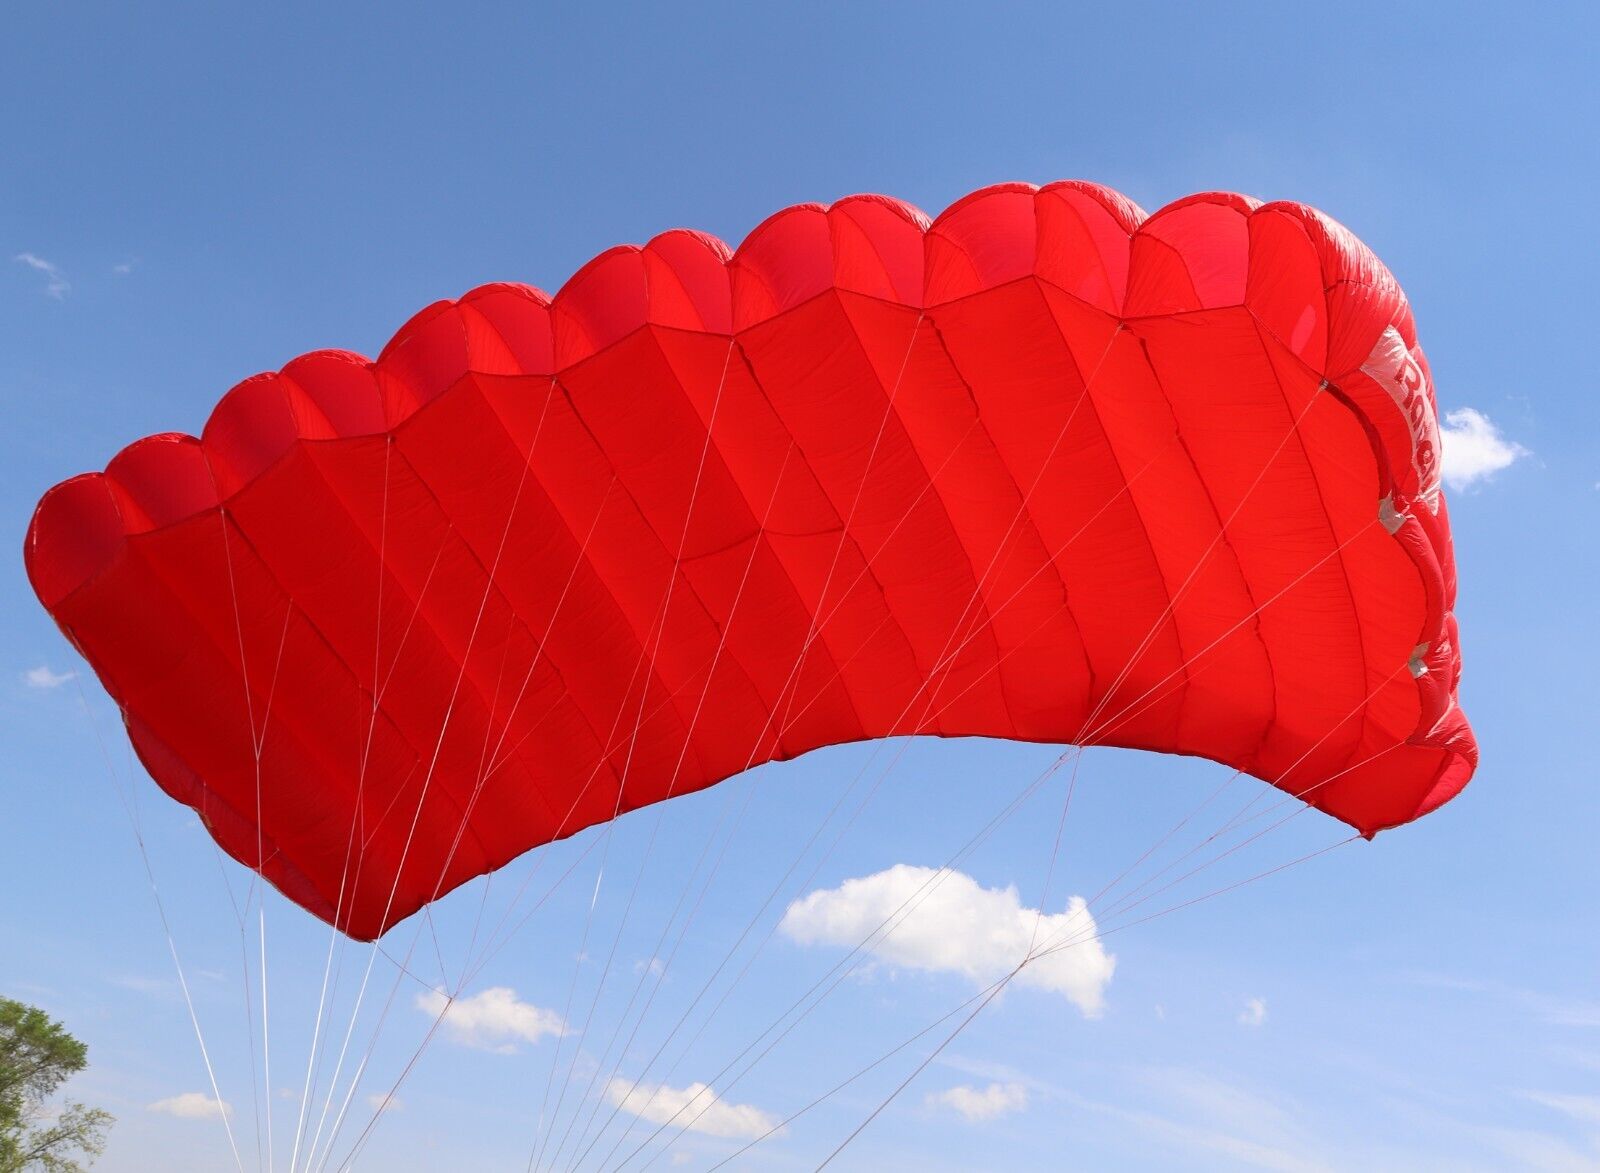 Raven Ii (218 Sq Ft) 7 Cell F111 Red Skydiving Parachute - Practice / Bridge Day